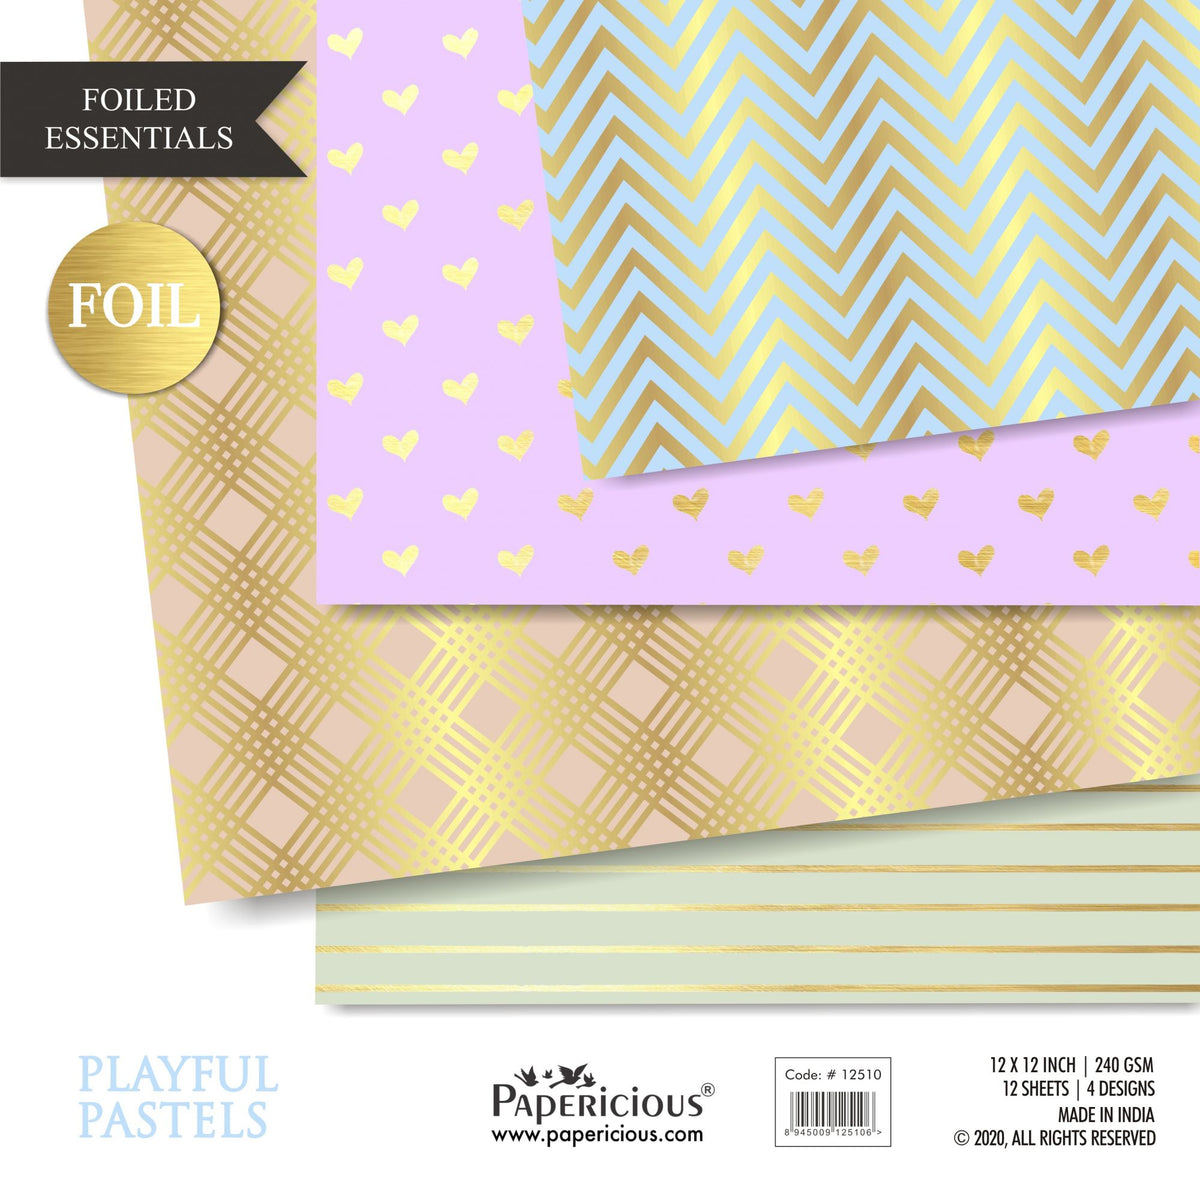 Papericious - Playful Pastels - Golden Foiled Pattern Scrapbook Papers 12x12 inch / 12 sheets